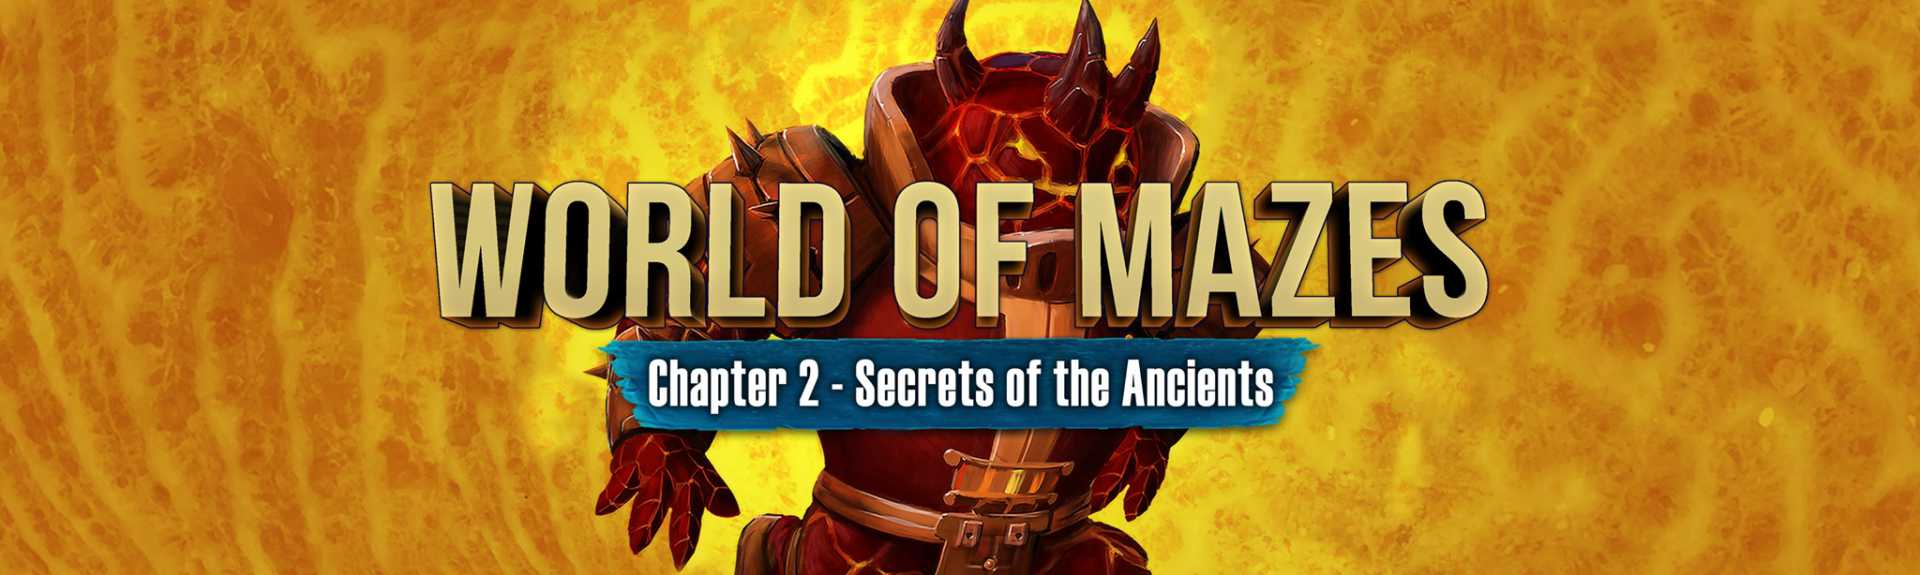 World of Mazes: Chapter 2 - Secrets of the Ancients